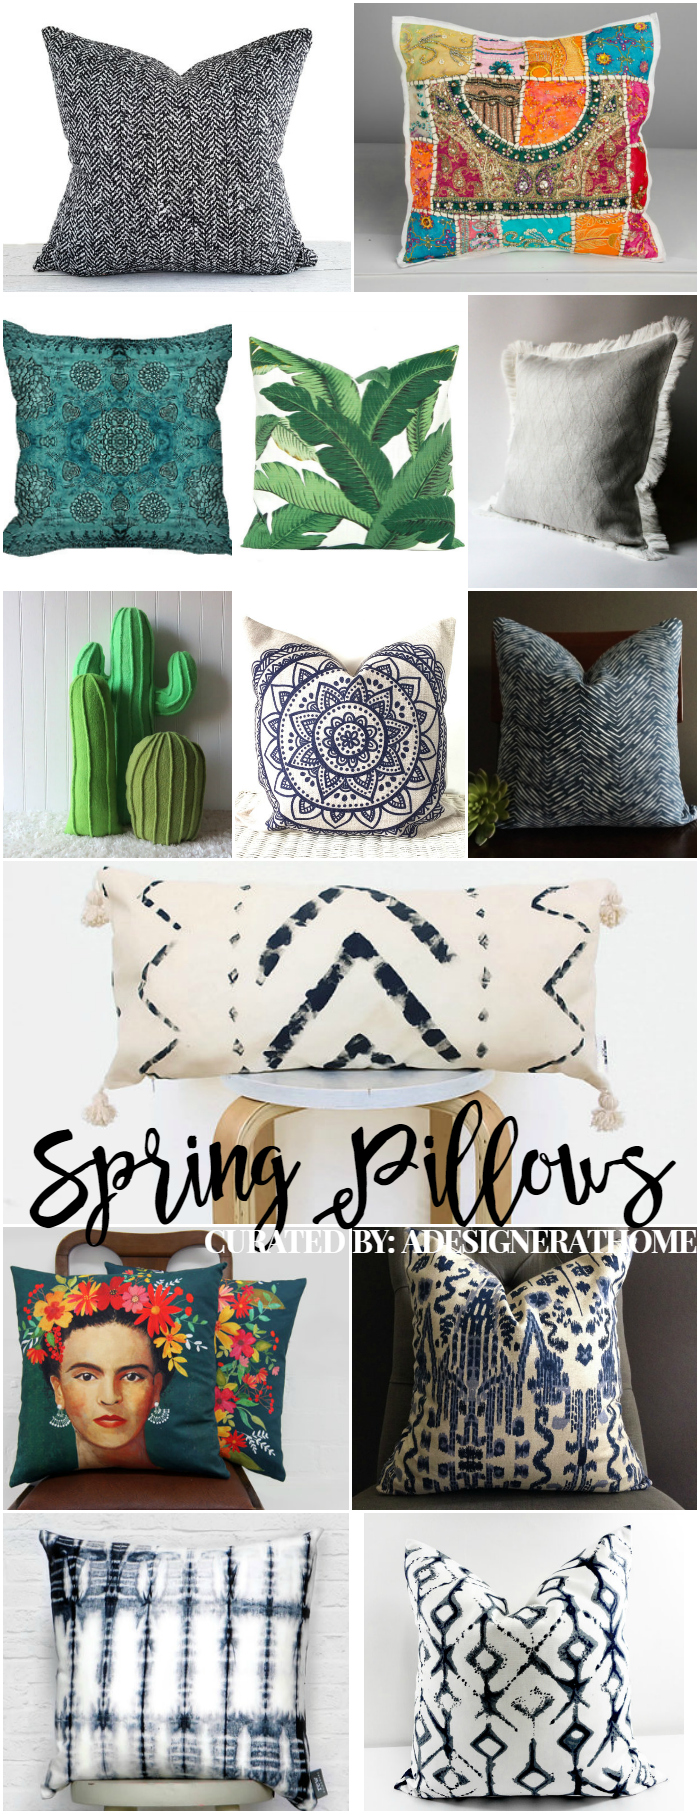 Decorating Bohemian: Spring 2017 Favorite Pillows and Throws